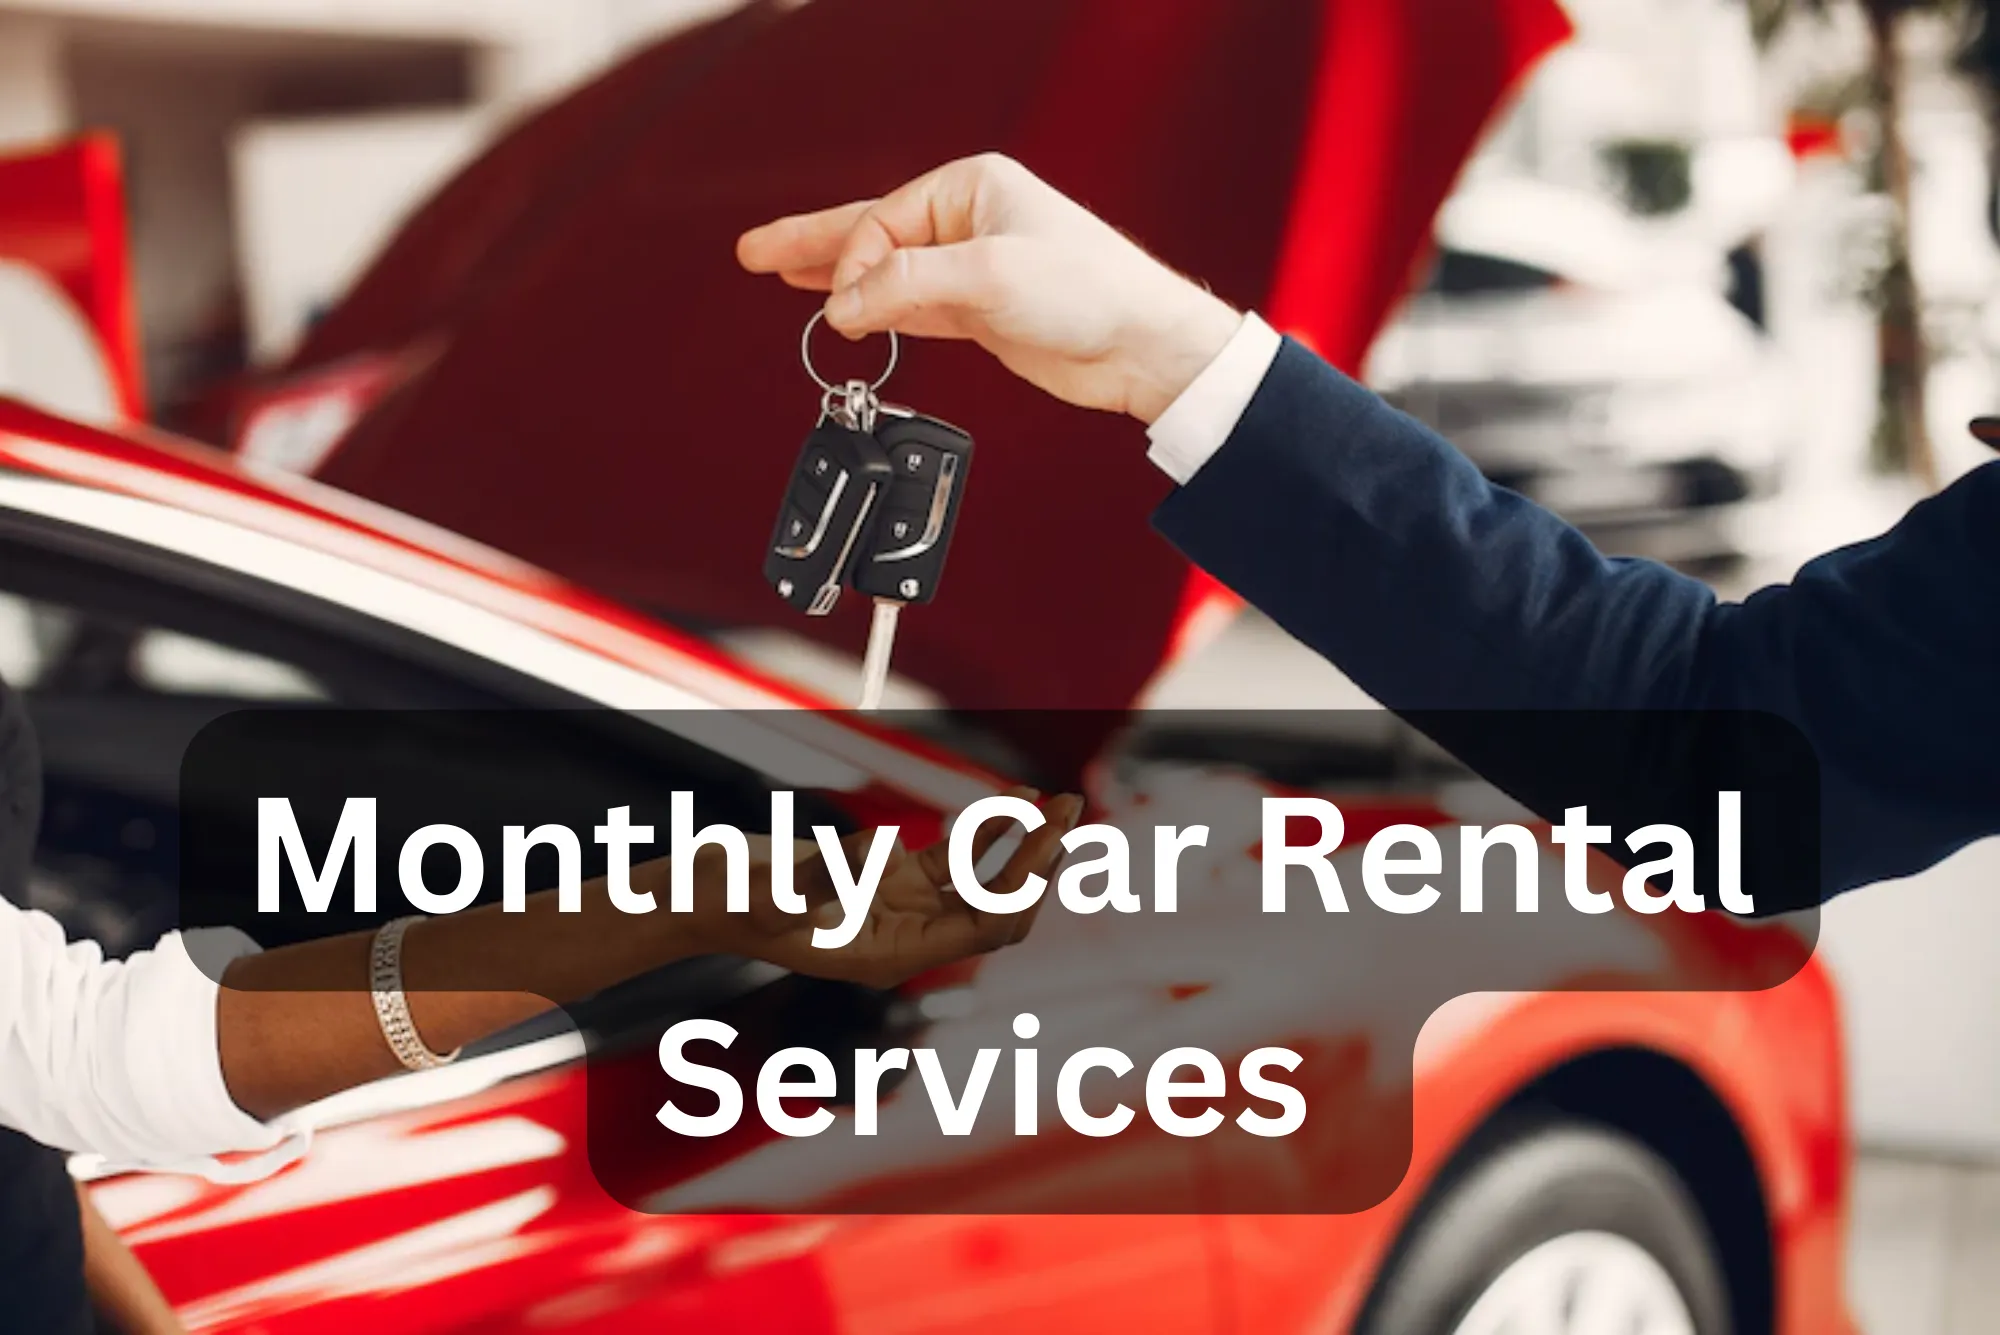 Monthly Car Rental Services